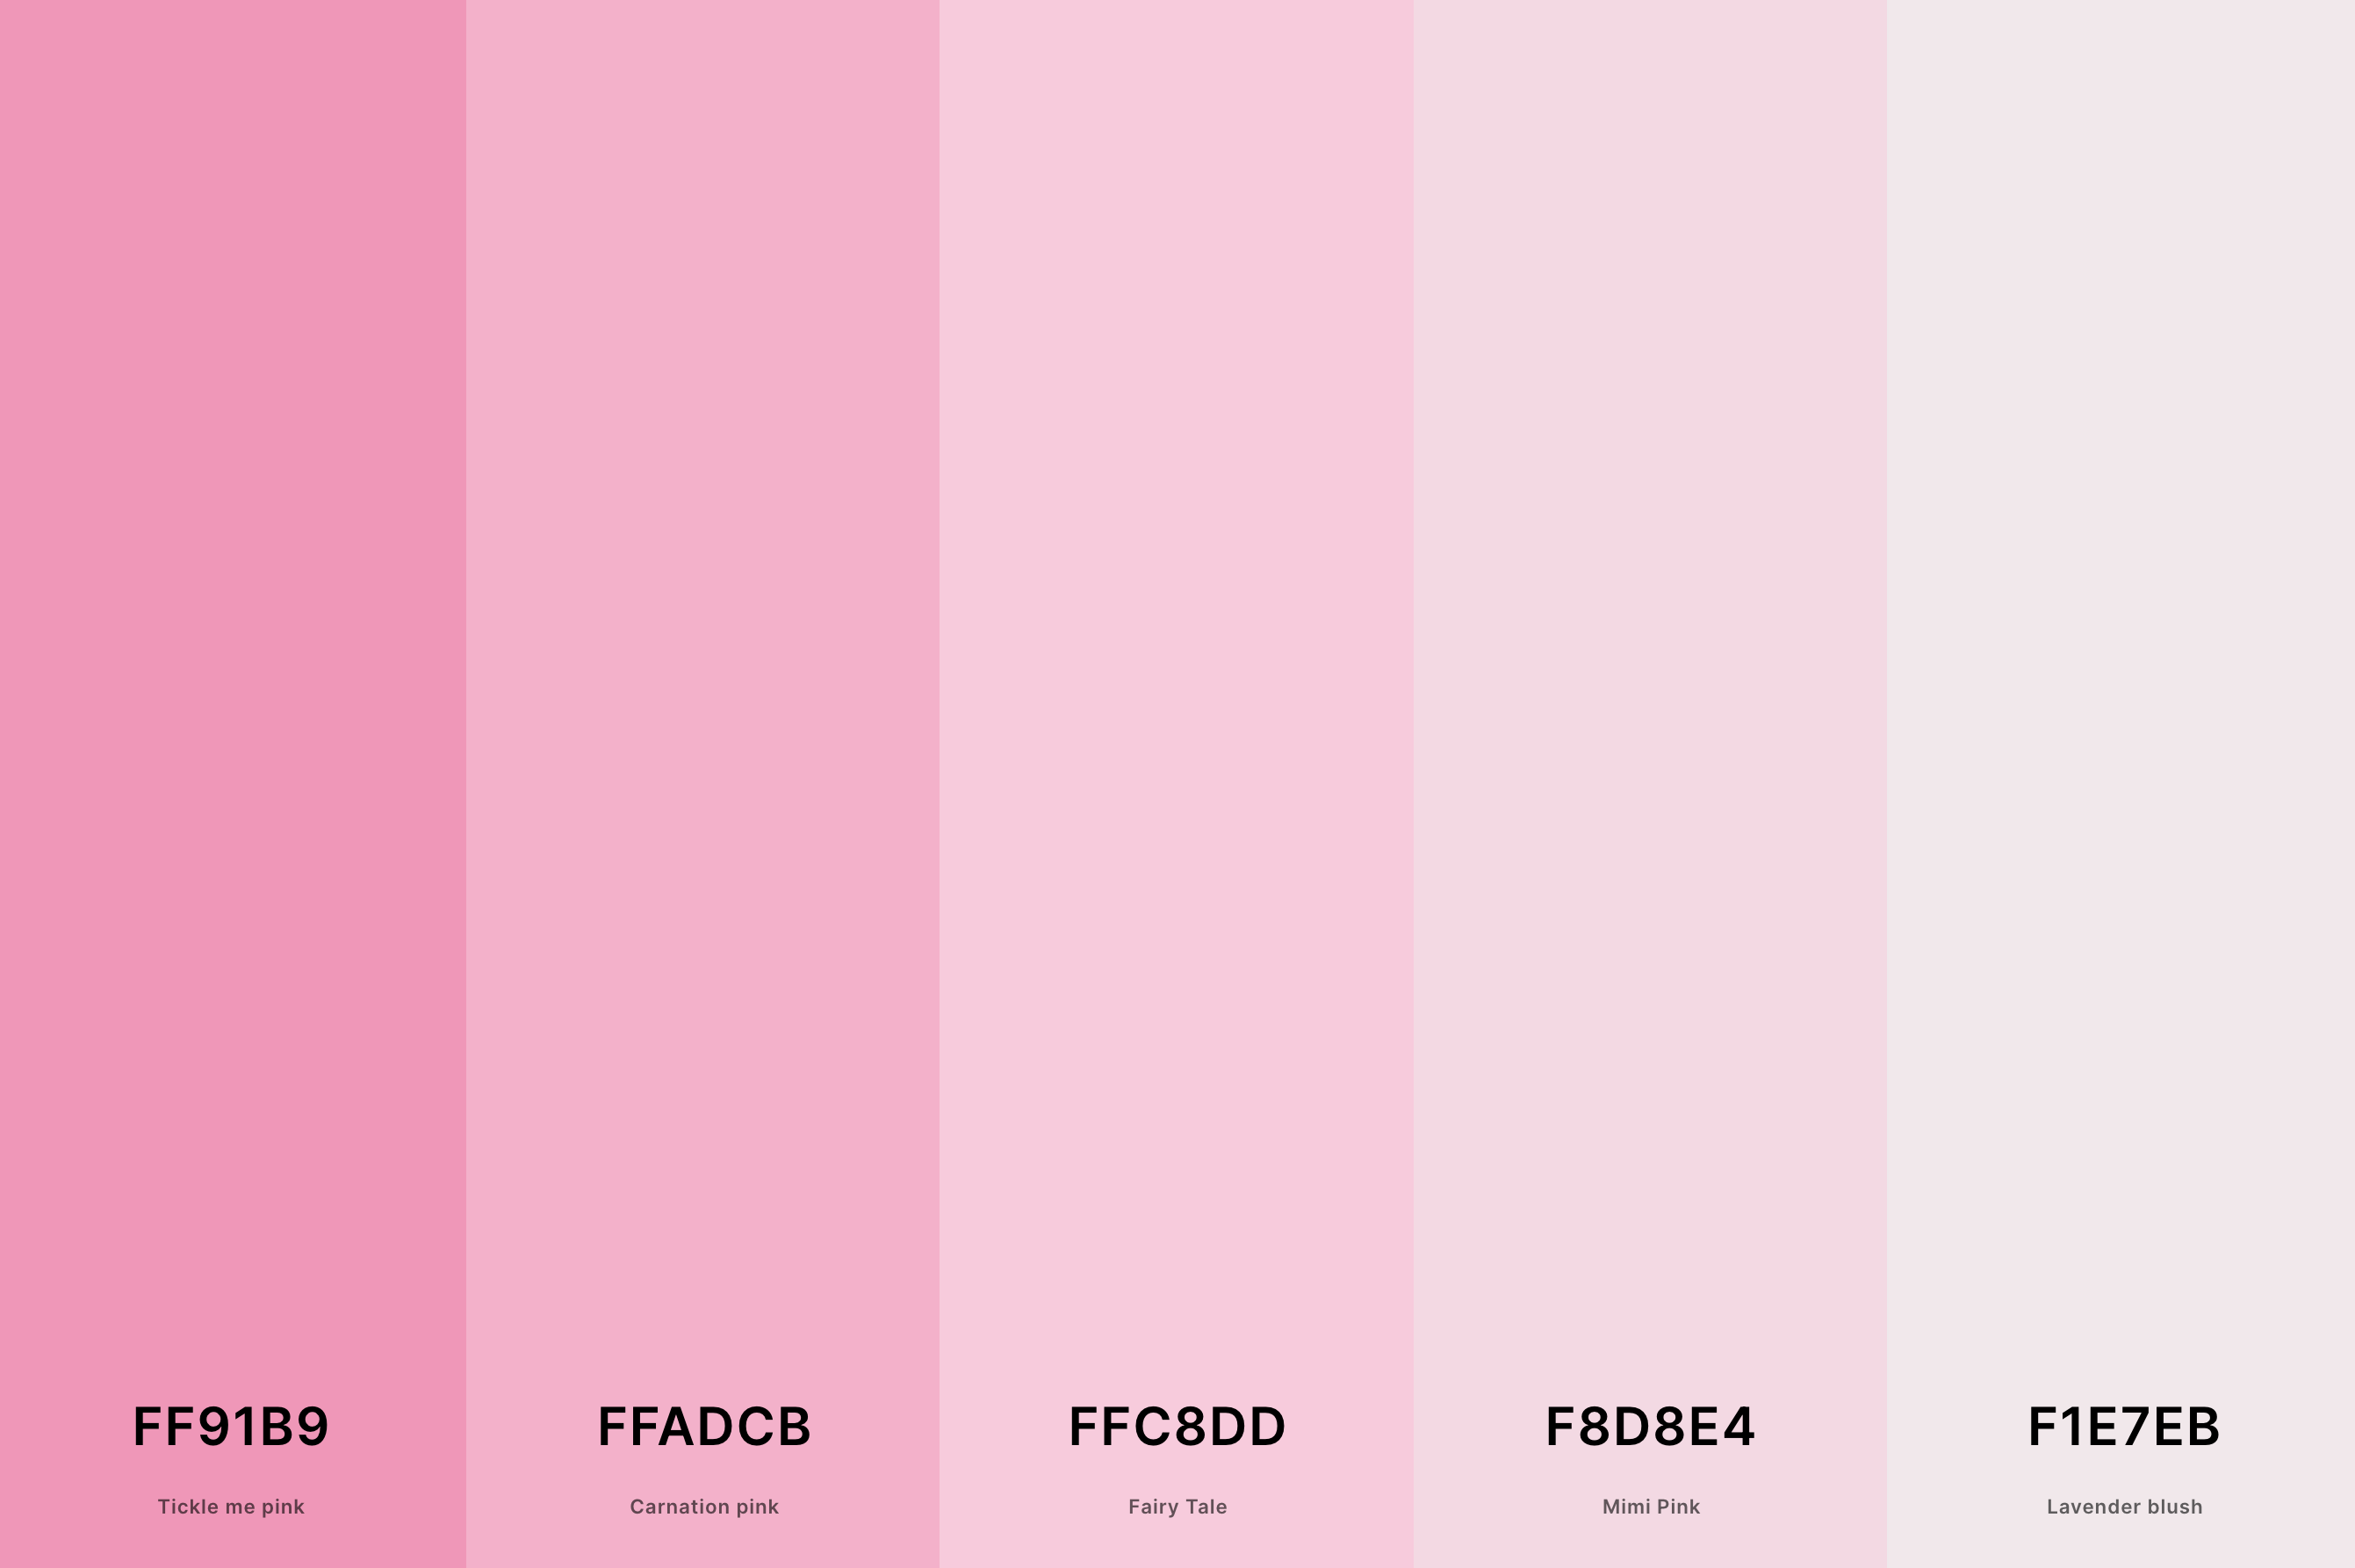 4. Aesthetic Pink Color Palette Color Palette with Tickle Me Pink (Hex #FF91B9) + Carnation Pink (Hex #FFADCB) + Fairy Tale (Hex #FFC8DD) + Mimi Pink (Hex #F8D8E4) + Lavender Blush (Hex #F1E7EB) Color Palette with Hex Codes